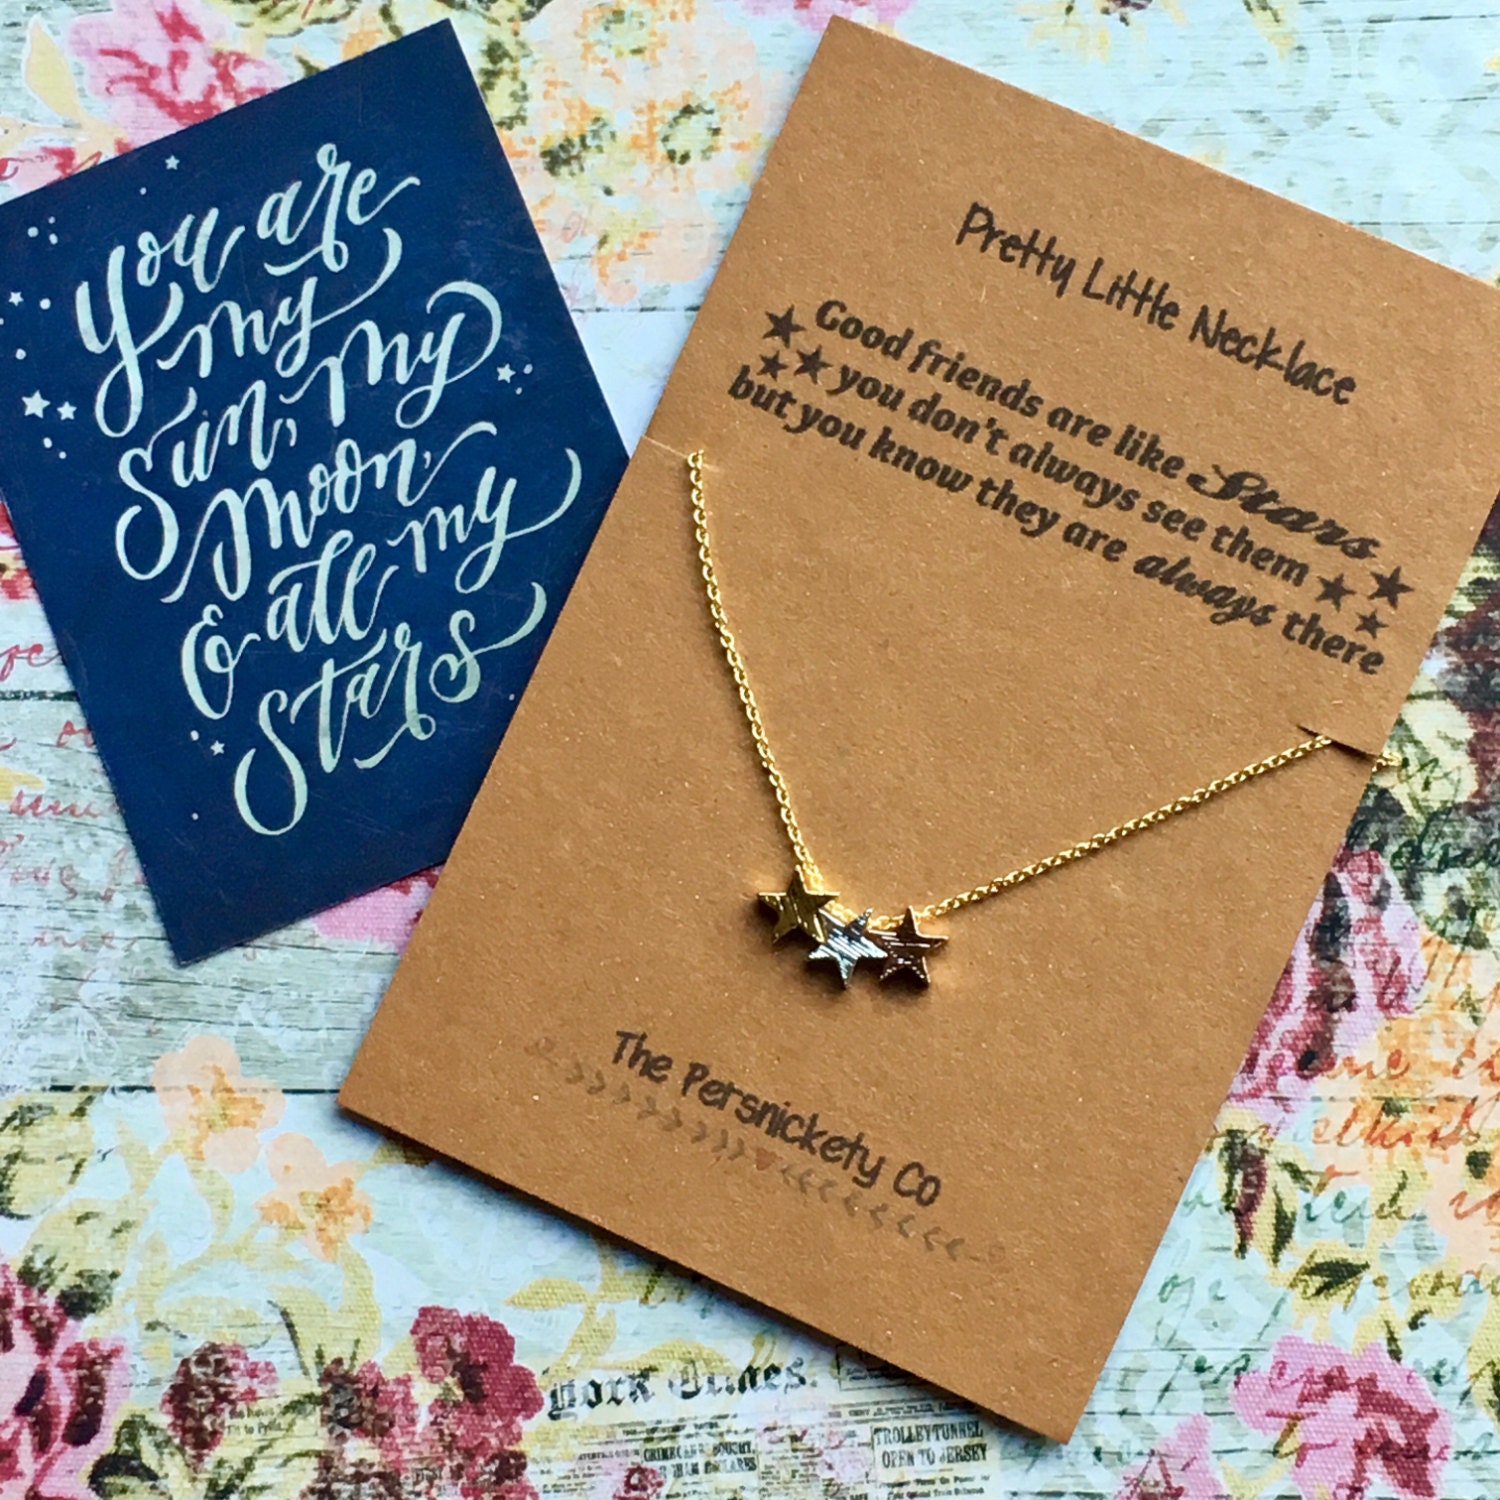 Pretty Little Necklace - Good Friends Are Like Stars...